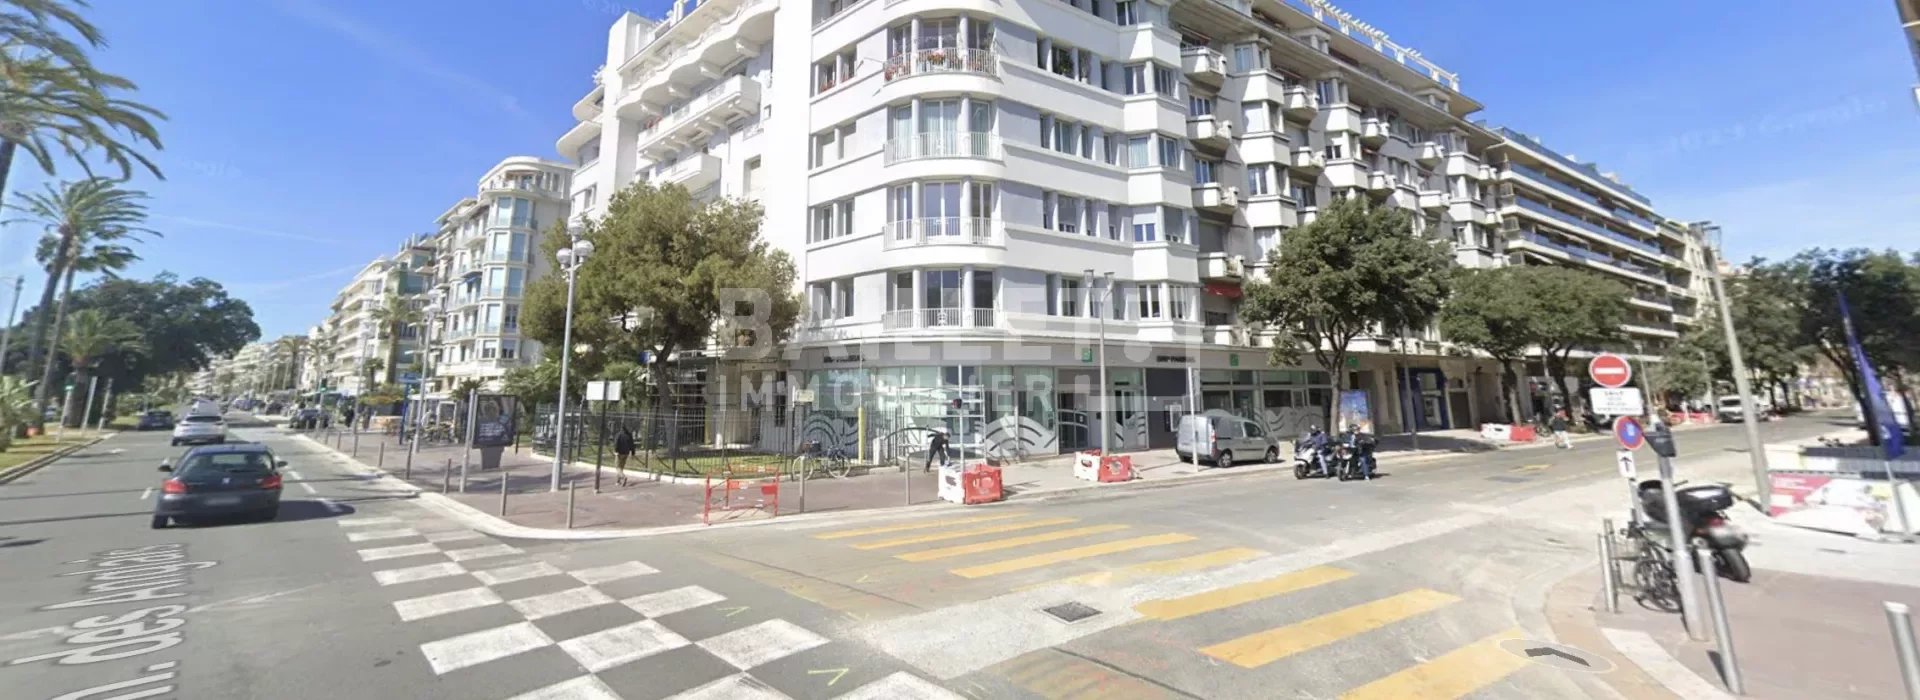 Local 28 M2 Nice Emplacement N°1 Promenade des Anglais